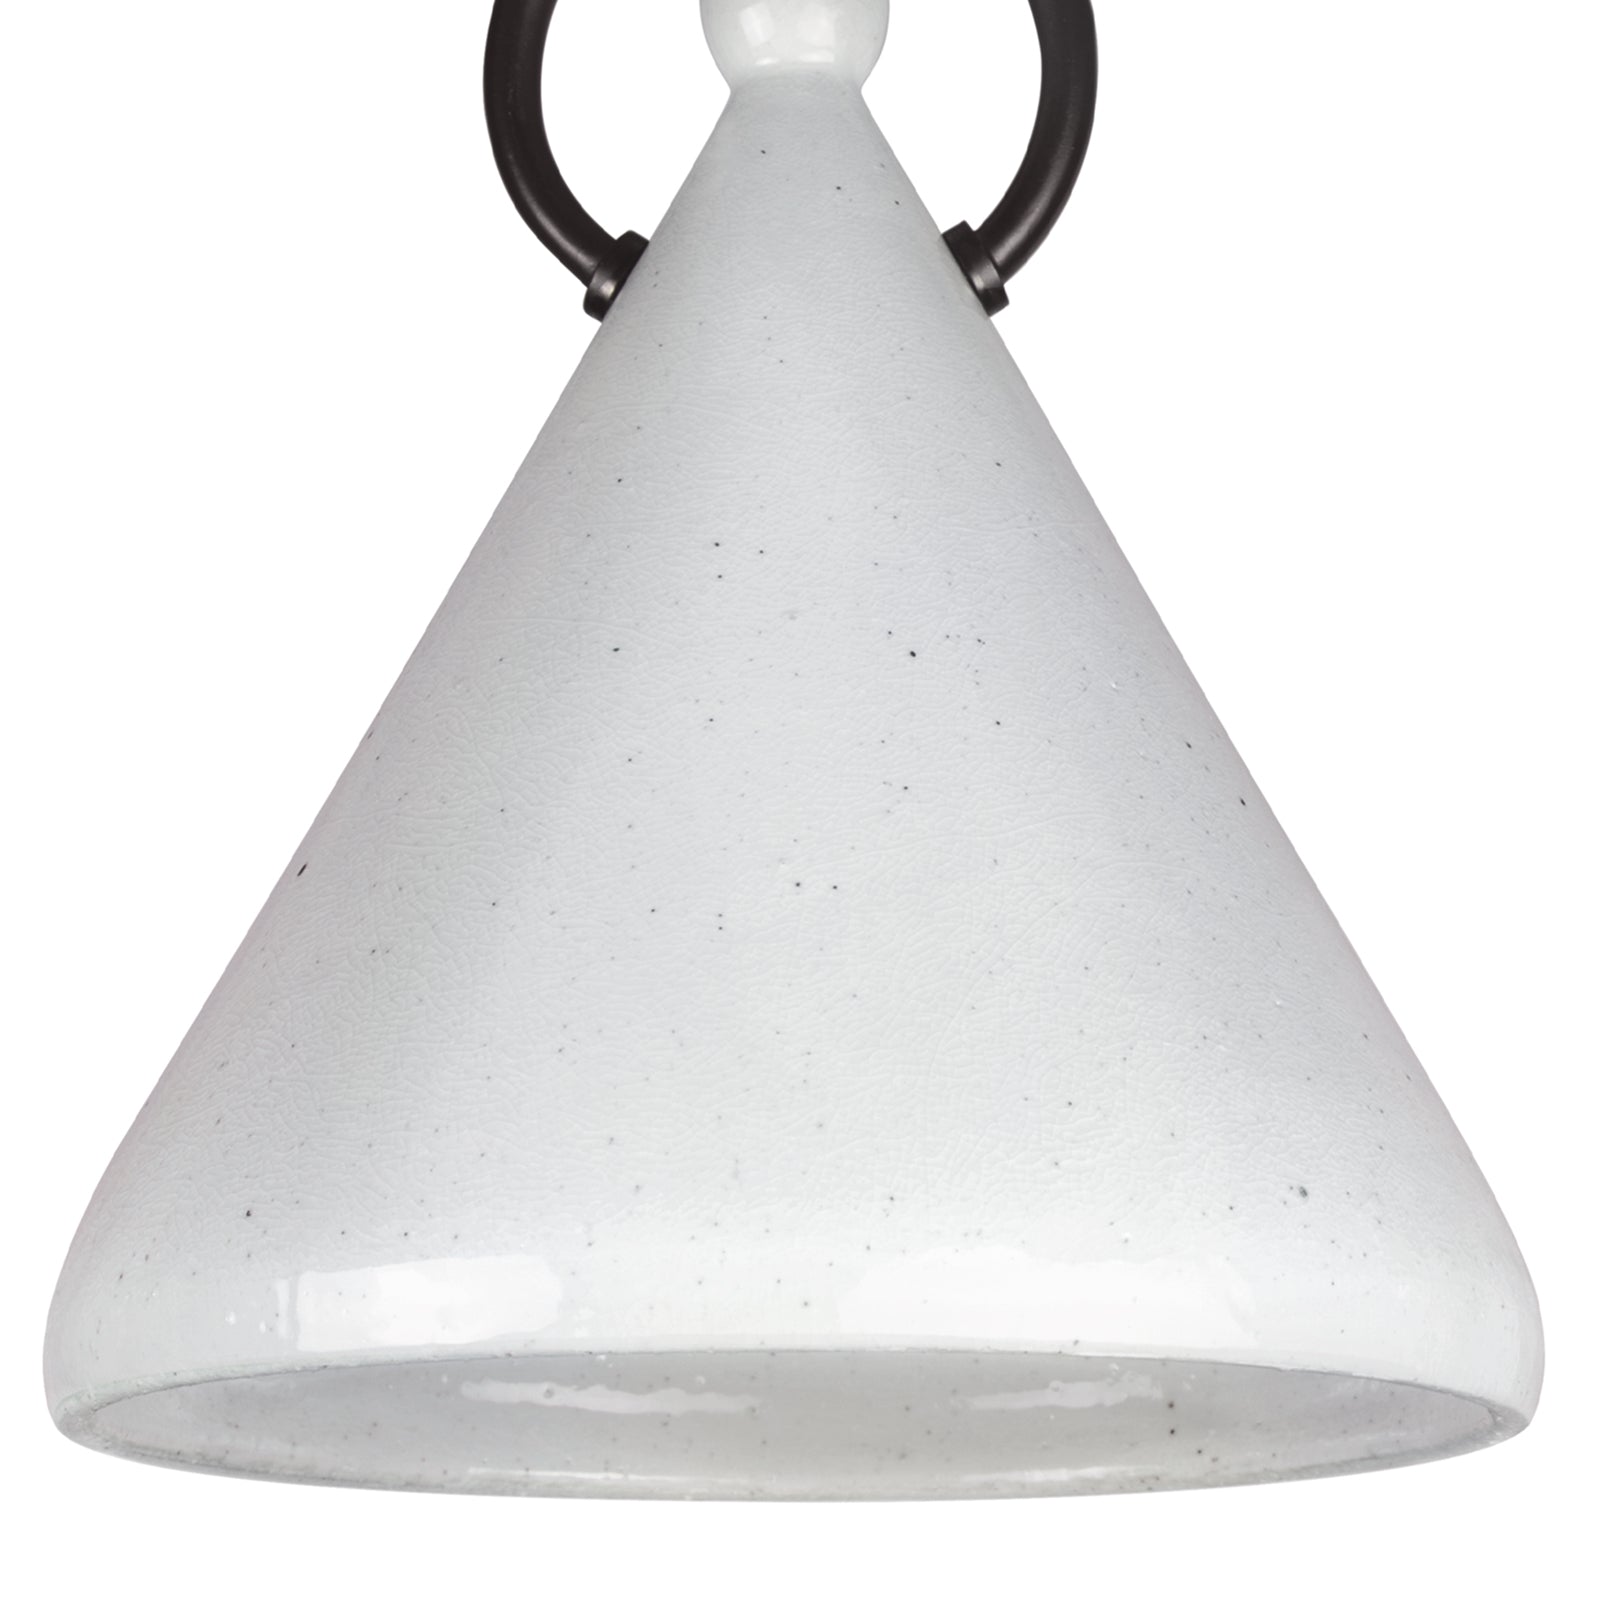 Talbot Ceramic Pendant by Southern Living